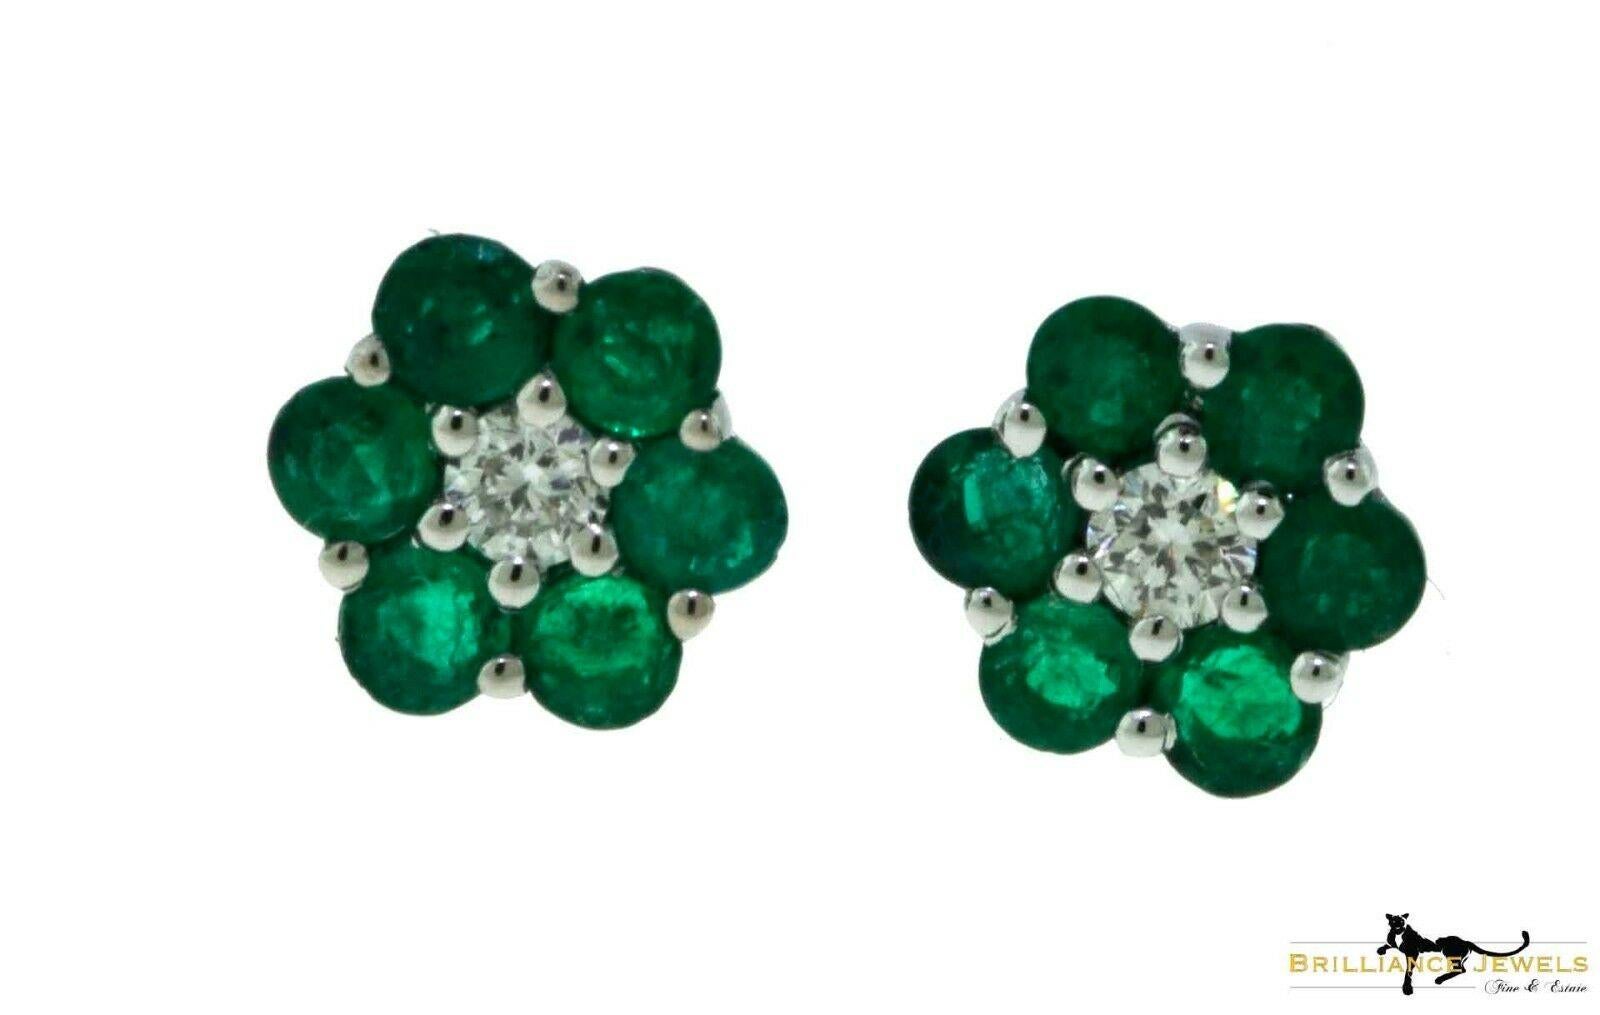 Brilliance Jewels, Miami
Questions? Call Us Anytime!
786,482,8100

Type: Small Studs

Metal: White Gold

Metal Purity: 18k

Stones: 12 Round Emeralds (6 each stud)

                2 Brilliant Cut Round Diamonds

Diamond Color: G

Diamond Color: